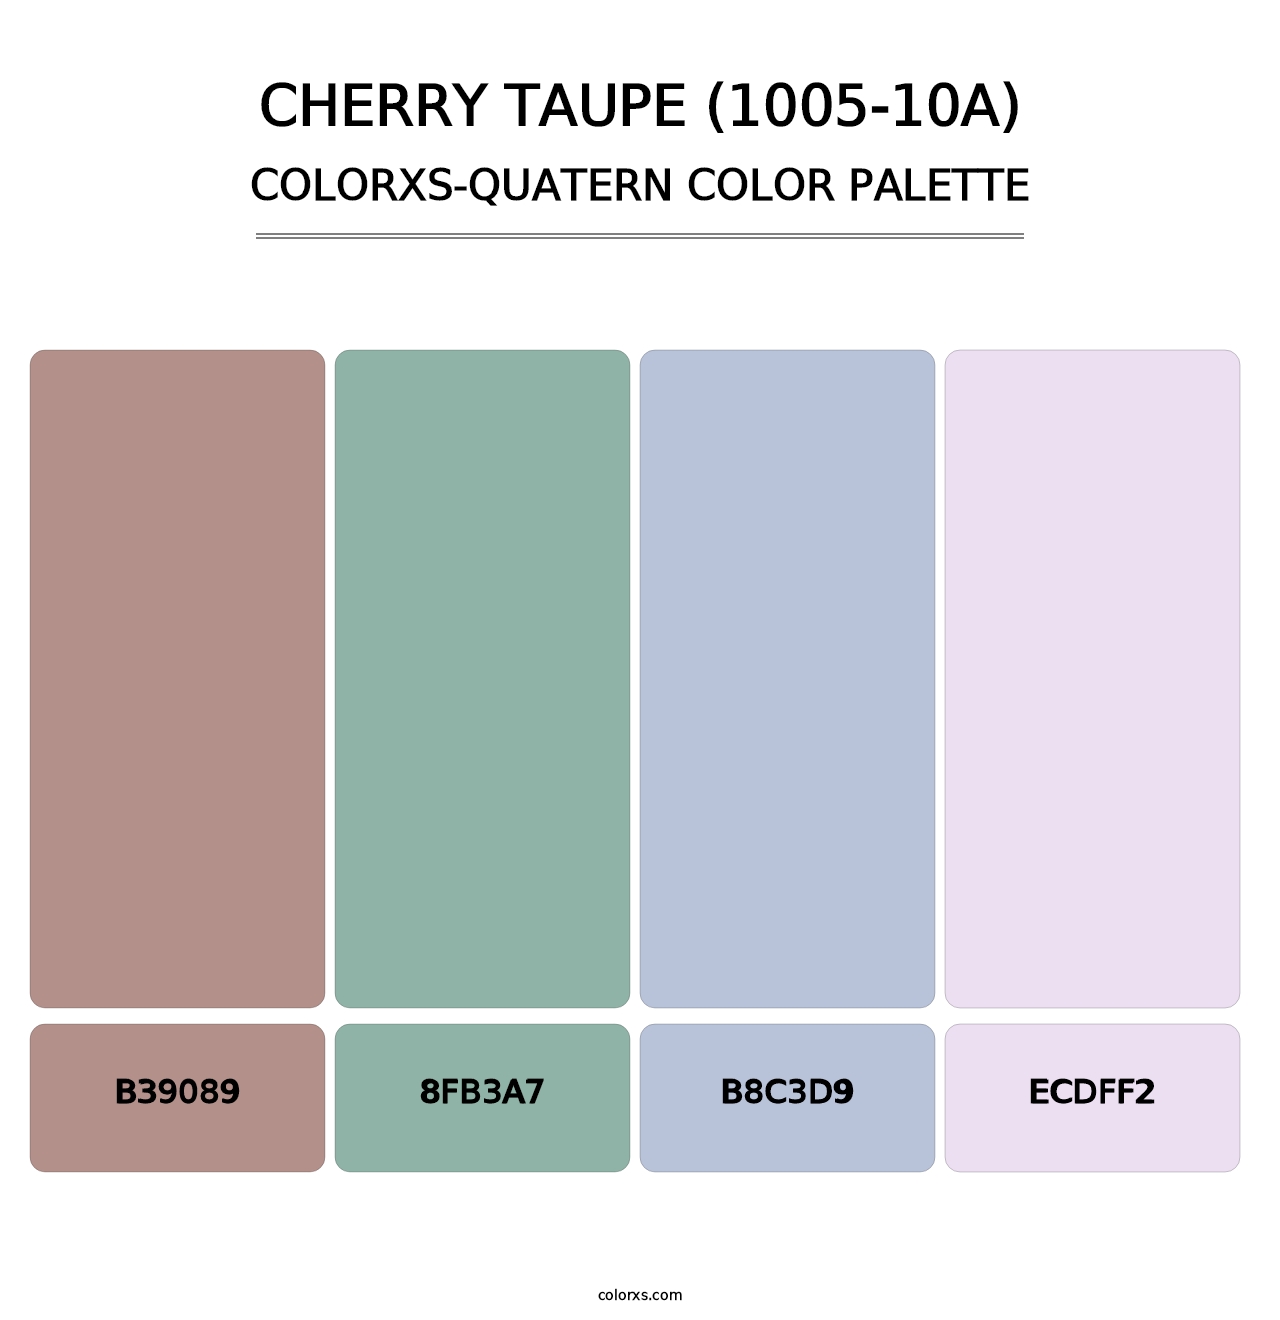 Cherry Taupe (1005-10A) - Colorxs Quatern Palette